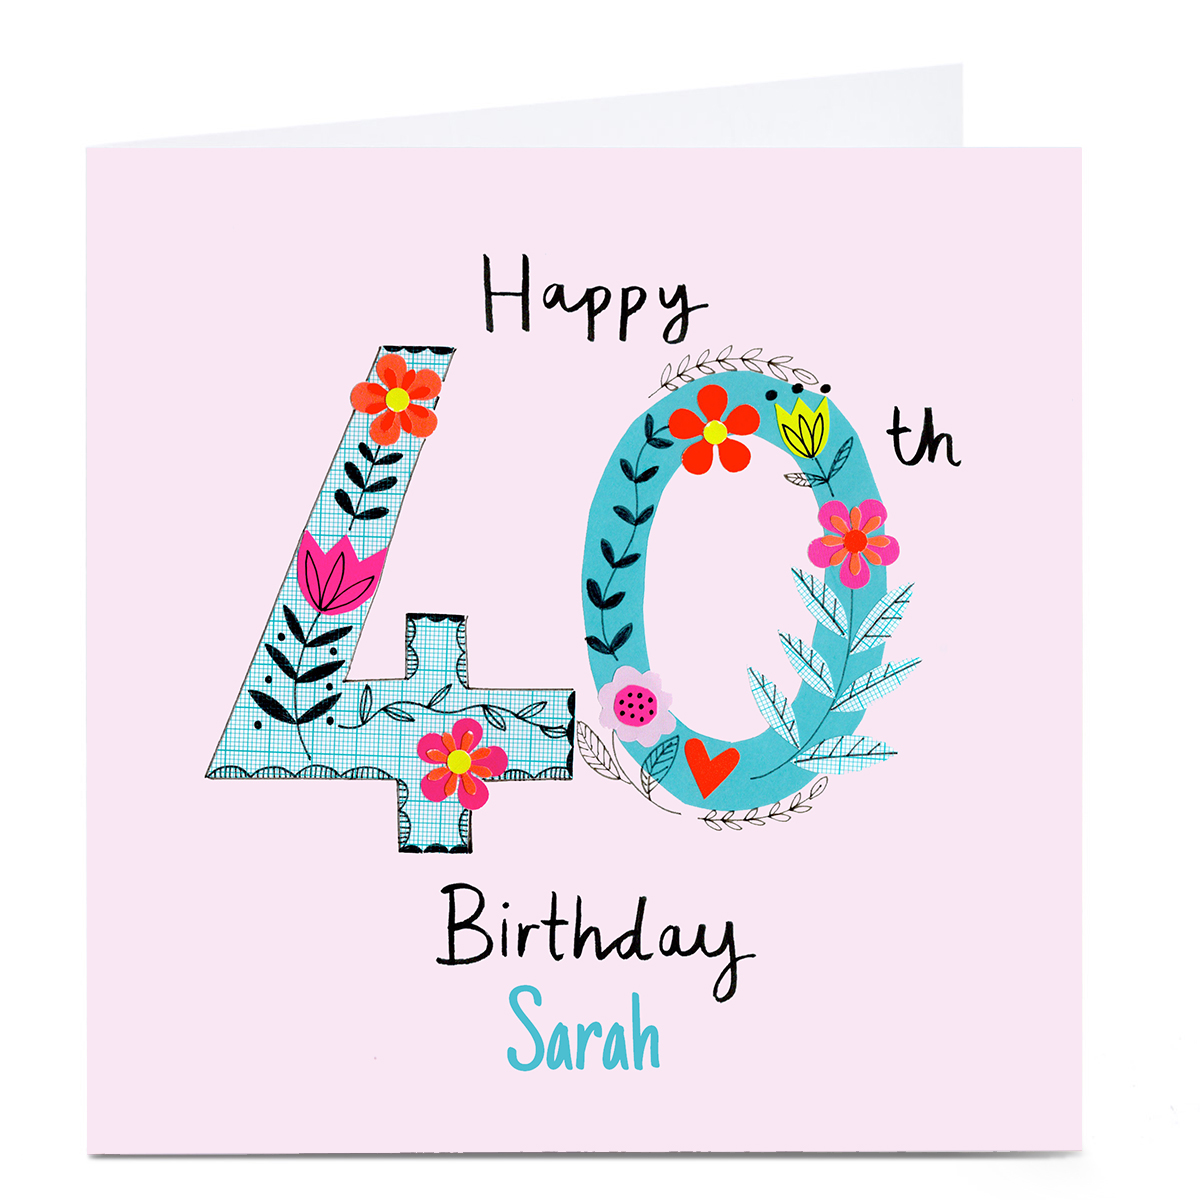 Buy Personalised Lindsay Loves To Draw 40th Birthday Card for GBP 3.29 ...